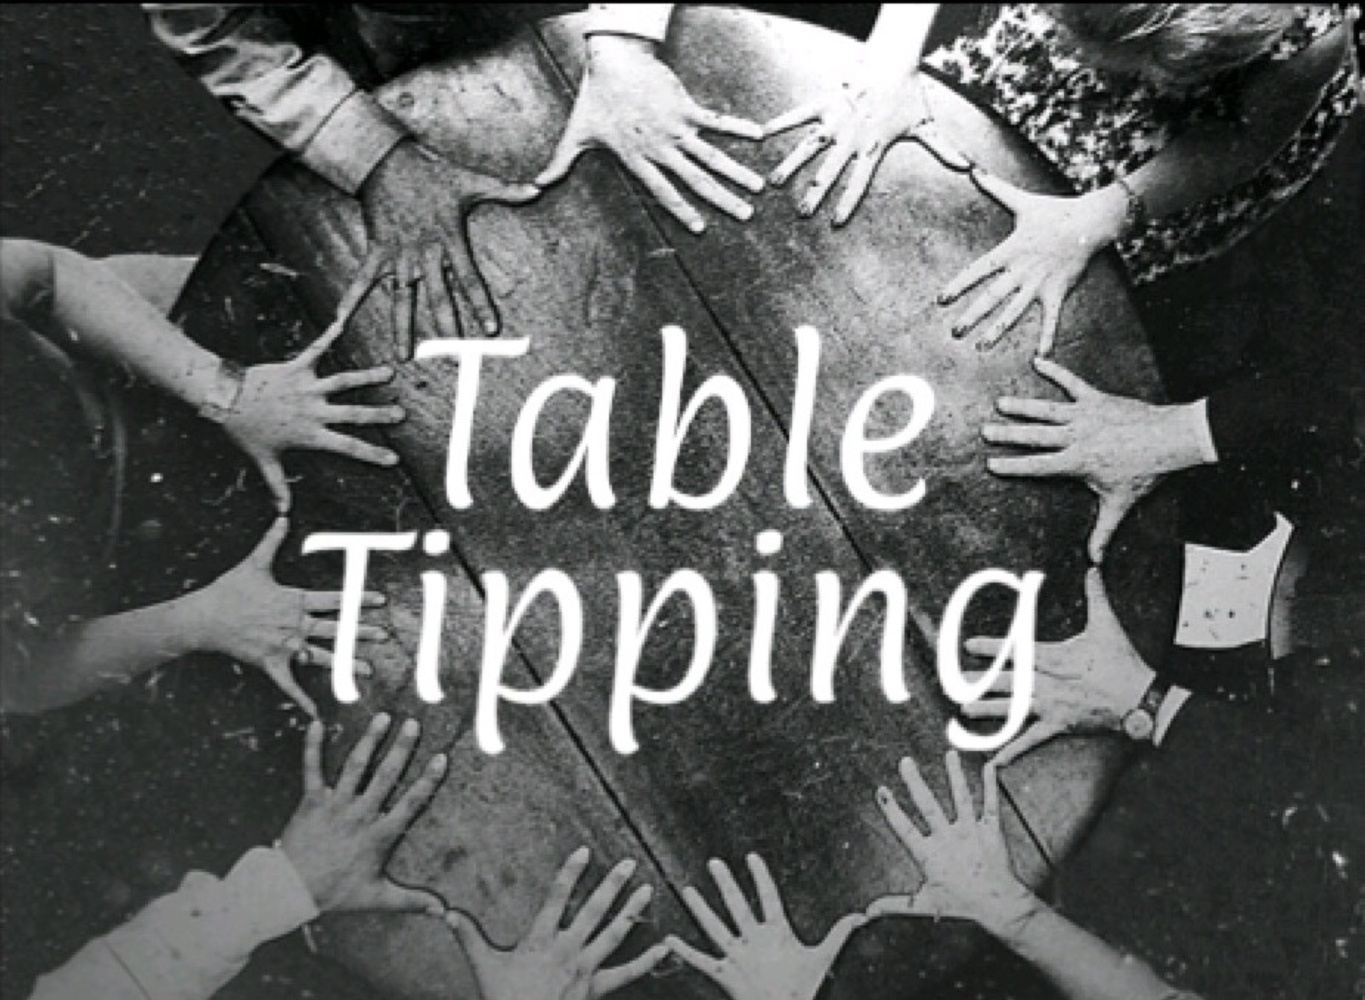 Table Tipping